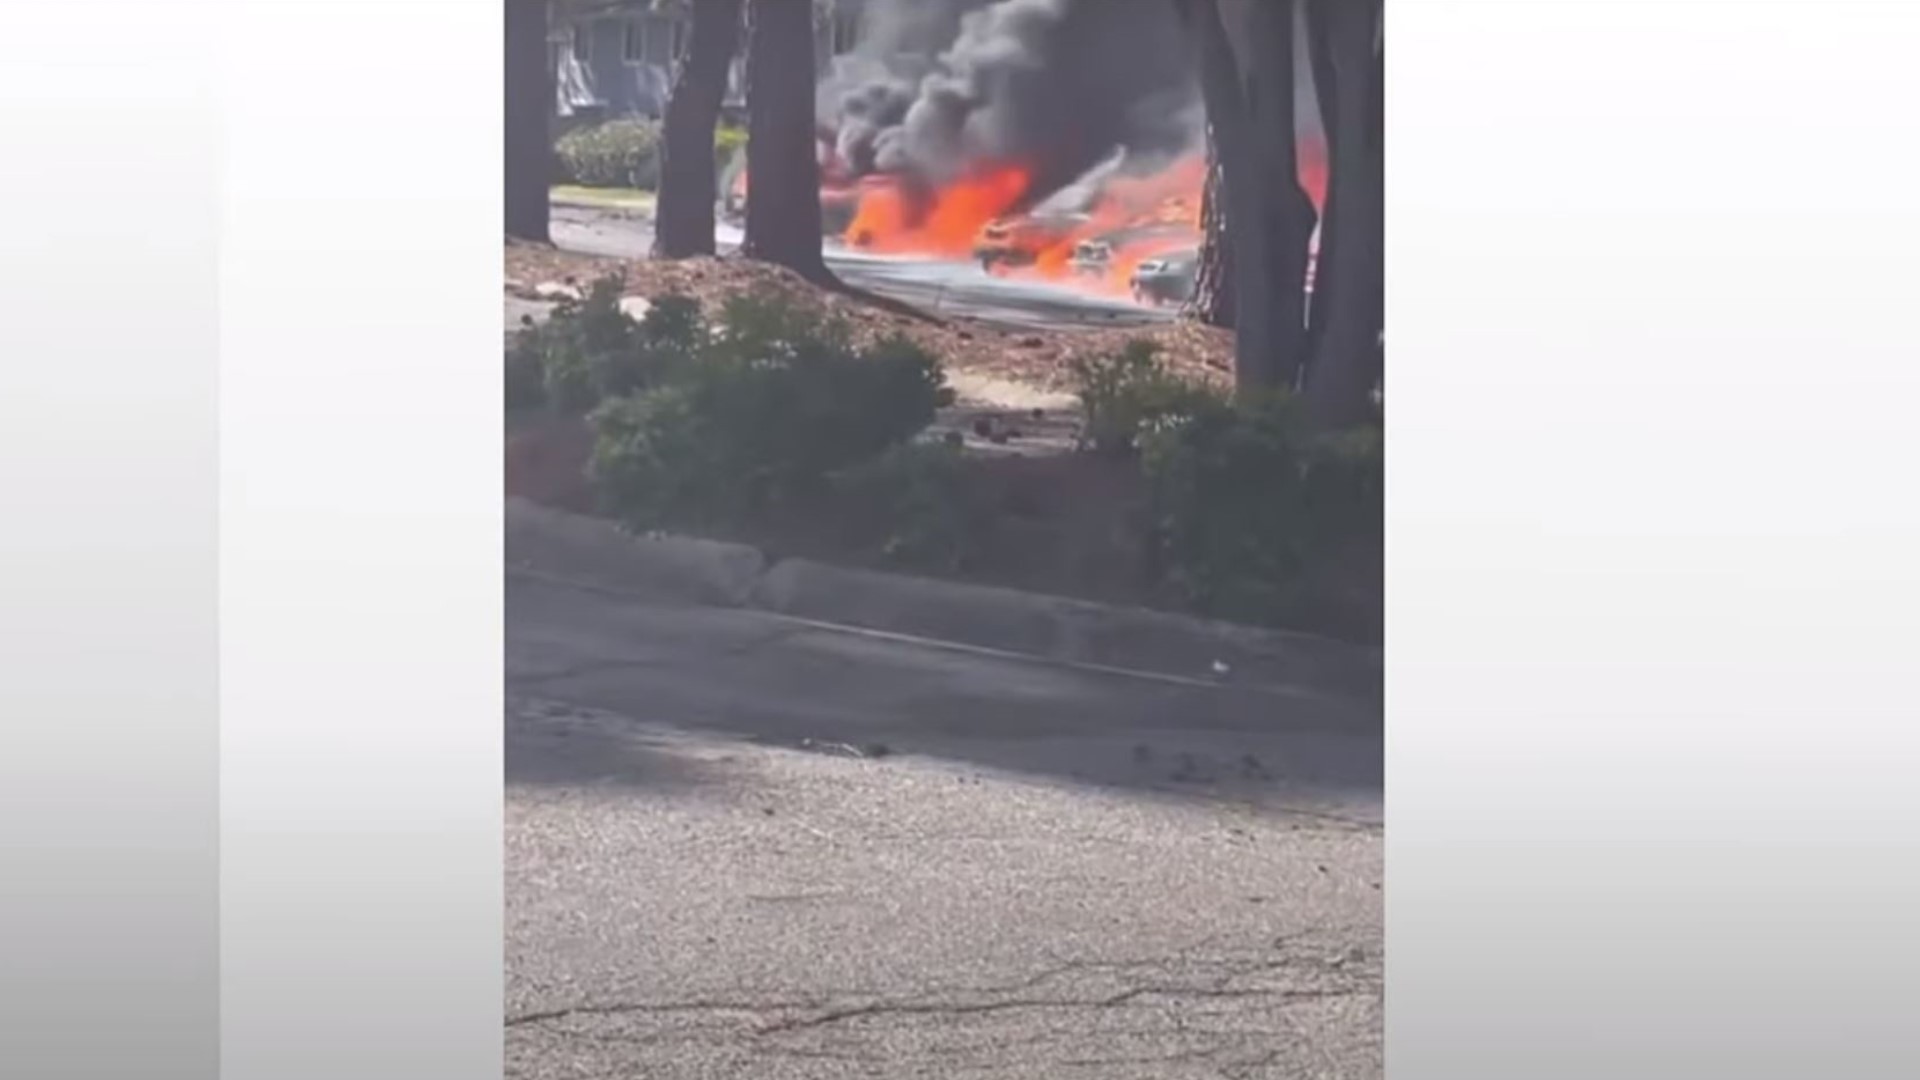 No one was reported injured in the fire. 11Alive viewer Valerie Jones sent in the video.